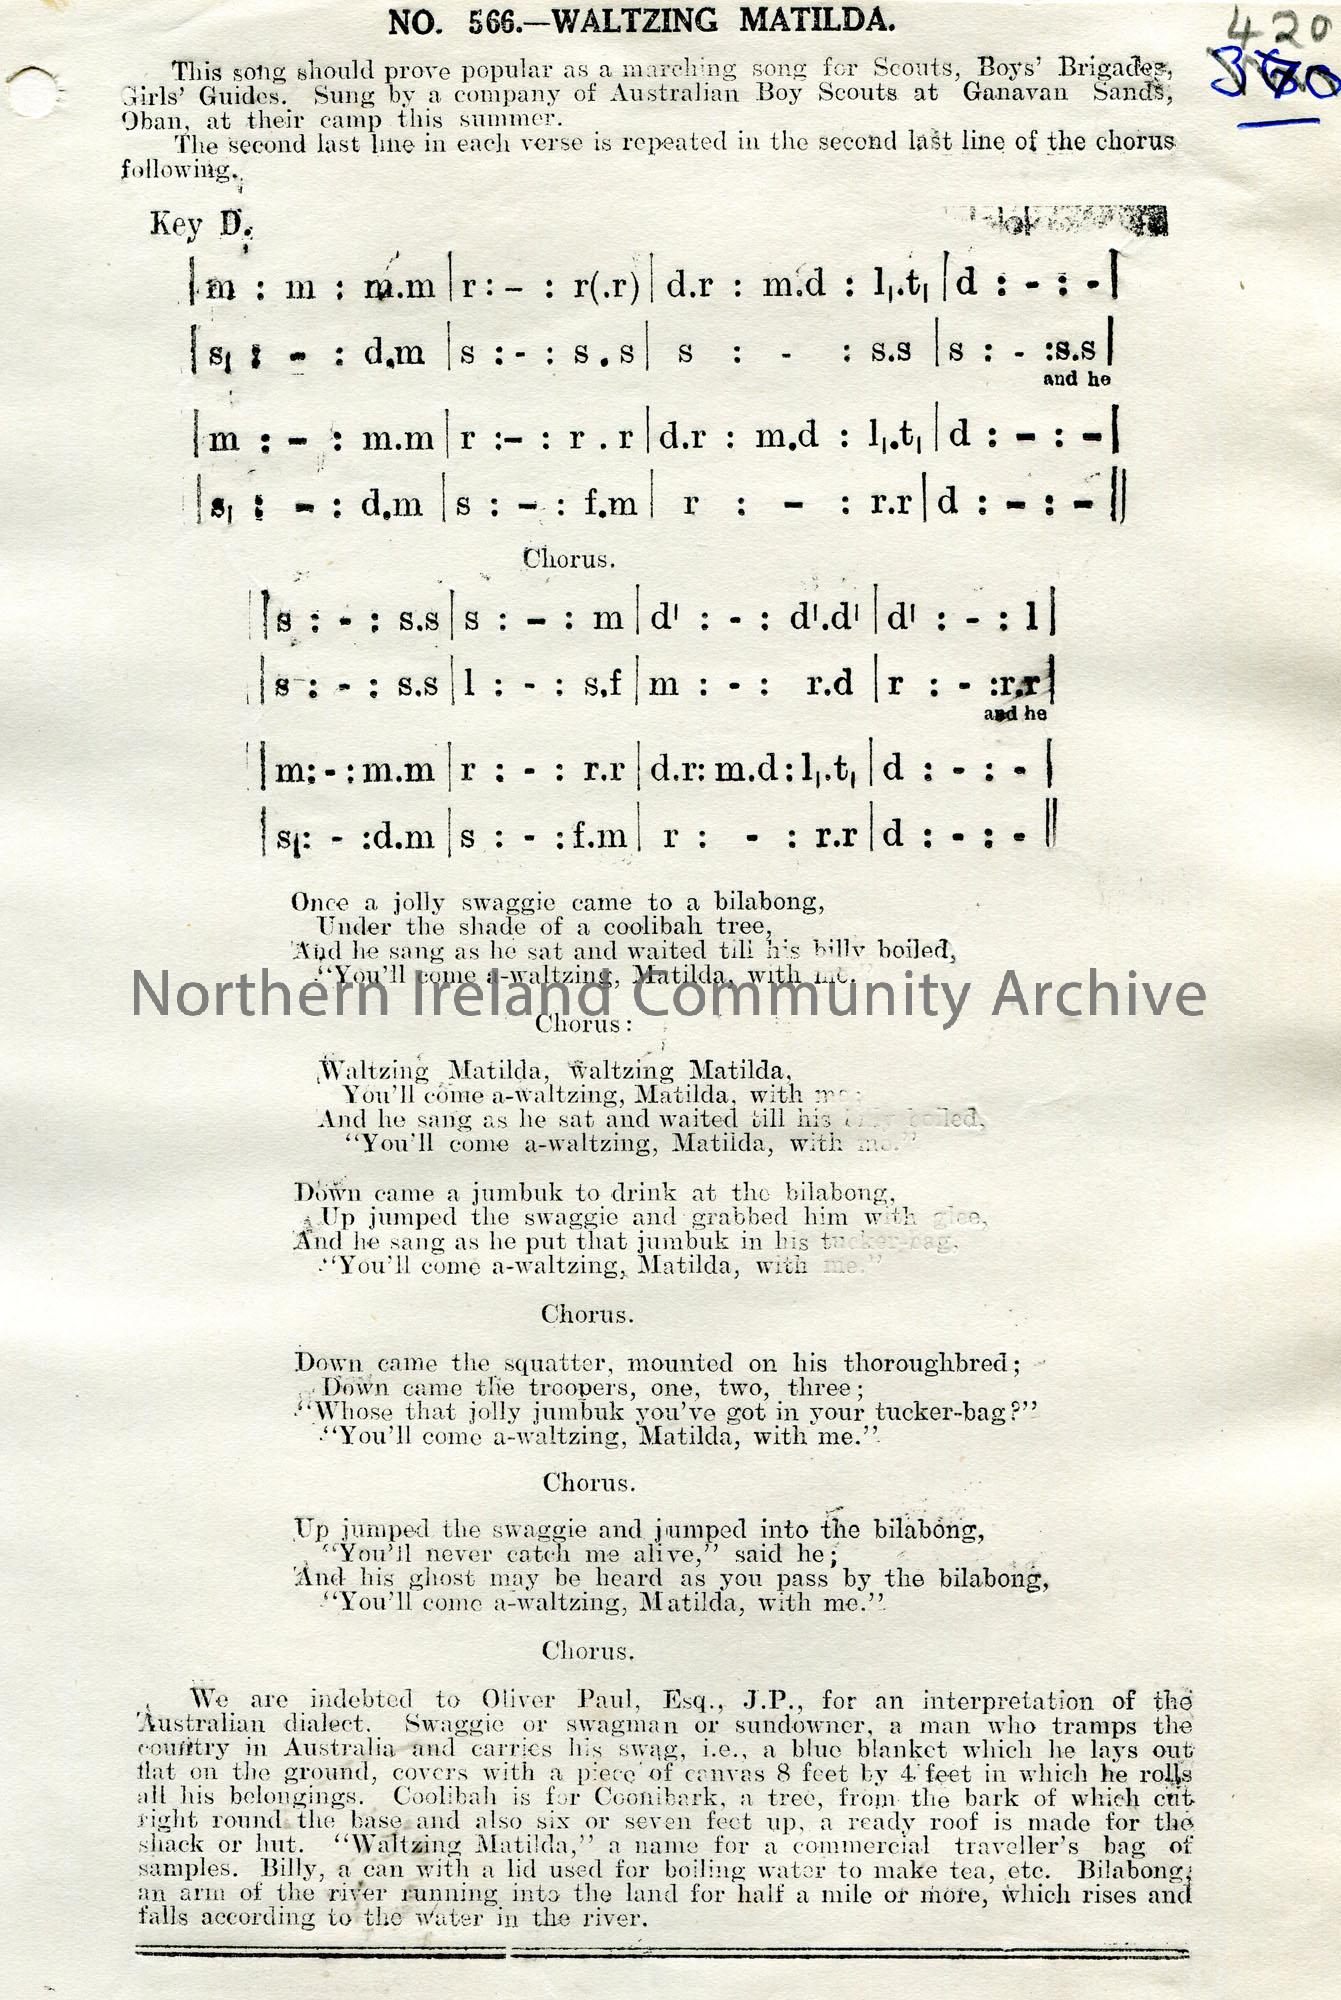 Songs of the People article of a tonic sol-fa notation and words to song titled, ‘No. 566 – Waltzing Matilda’.